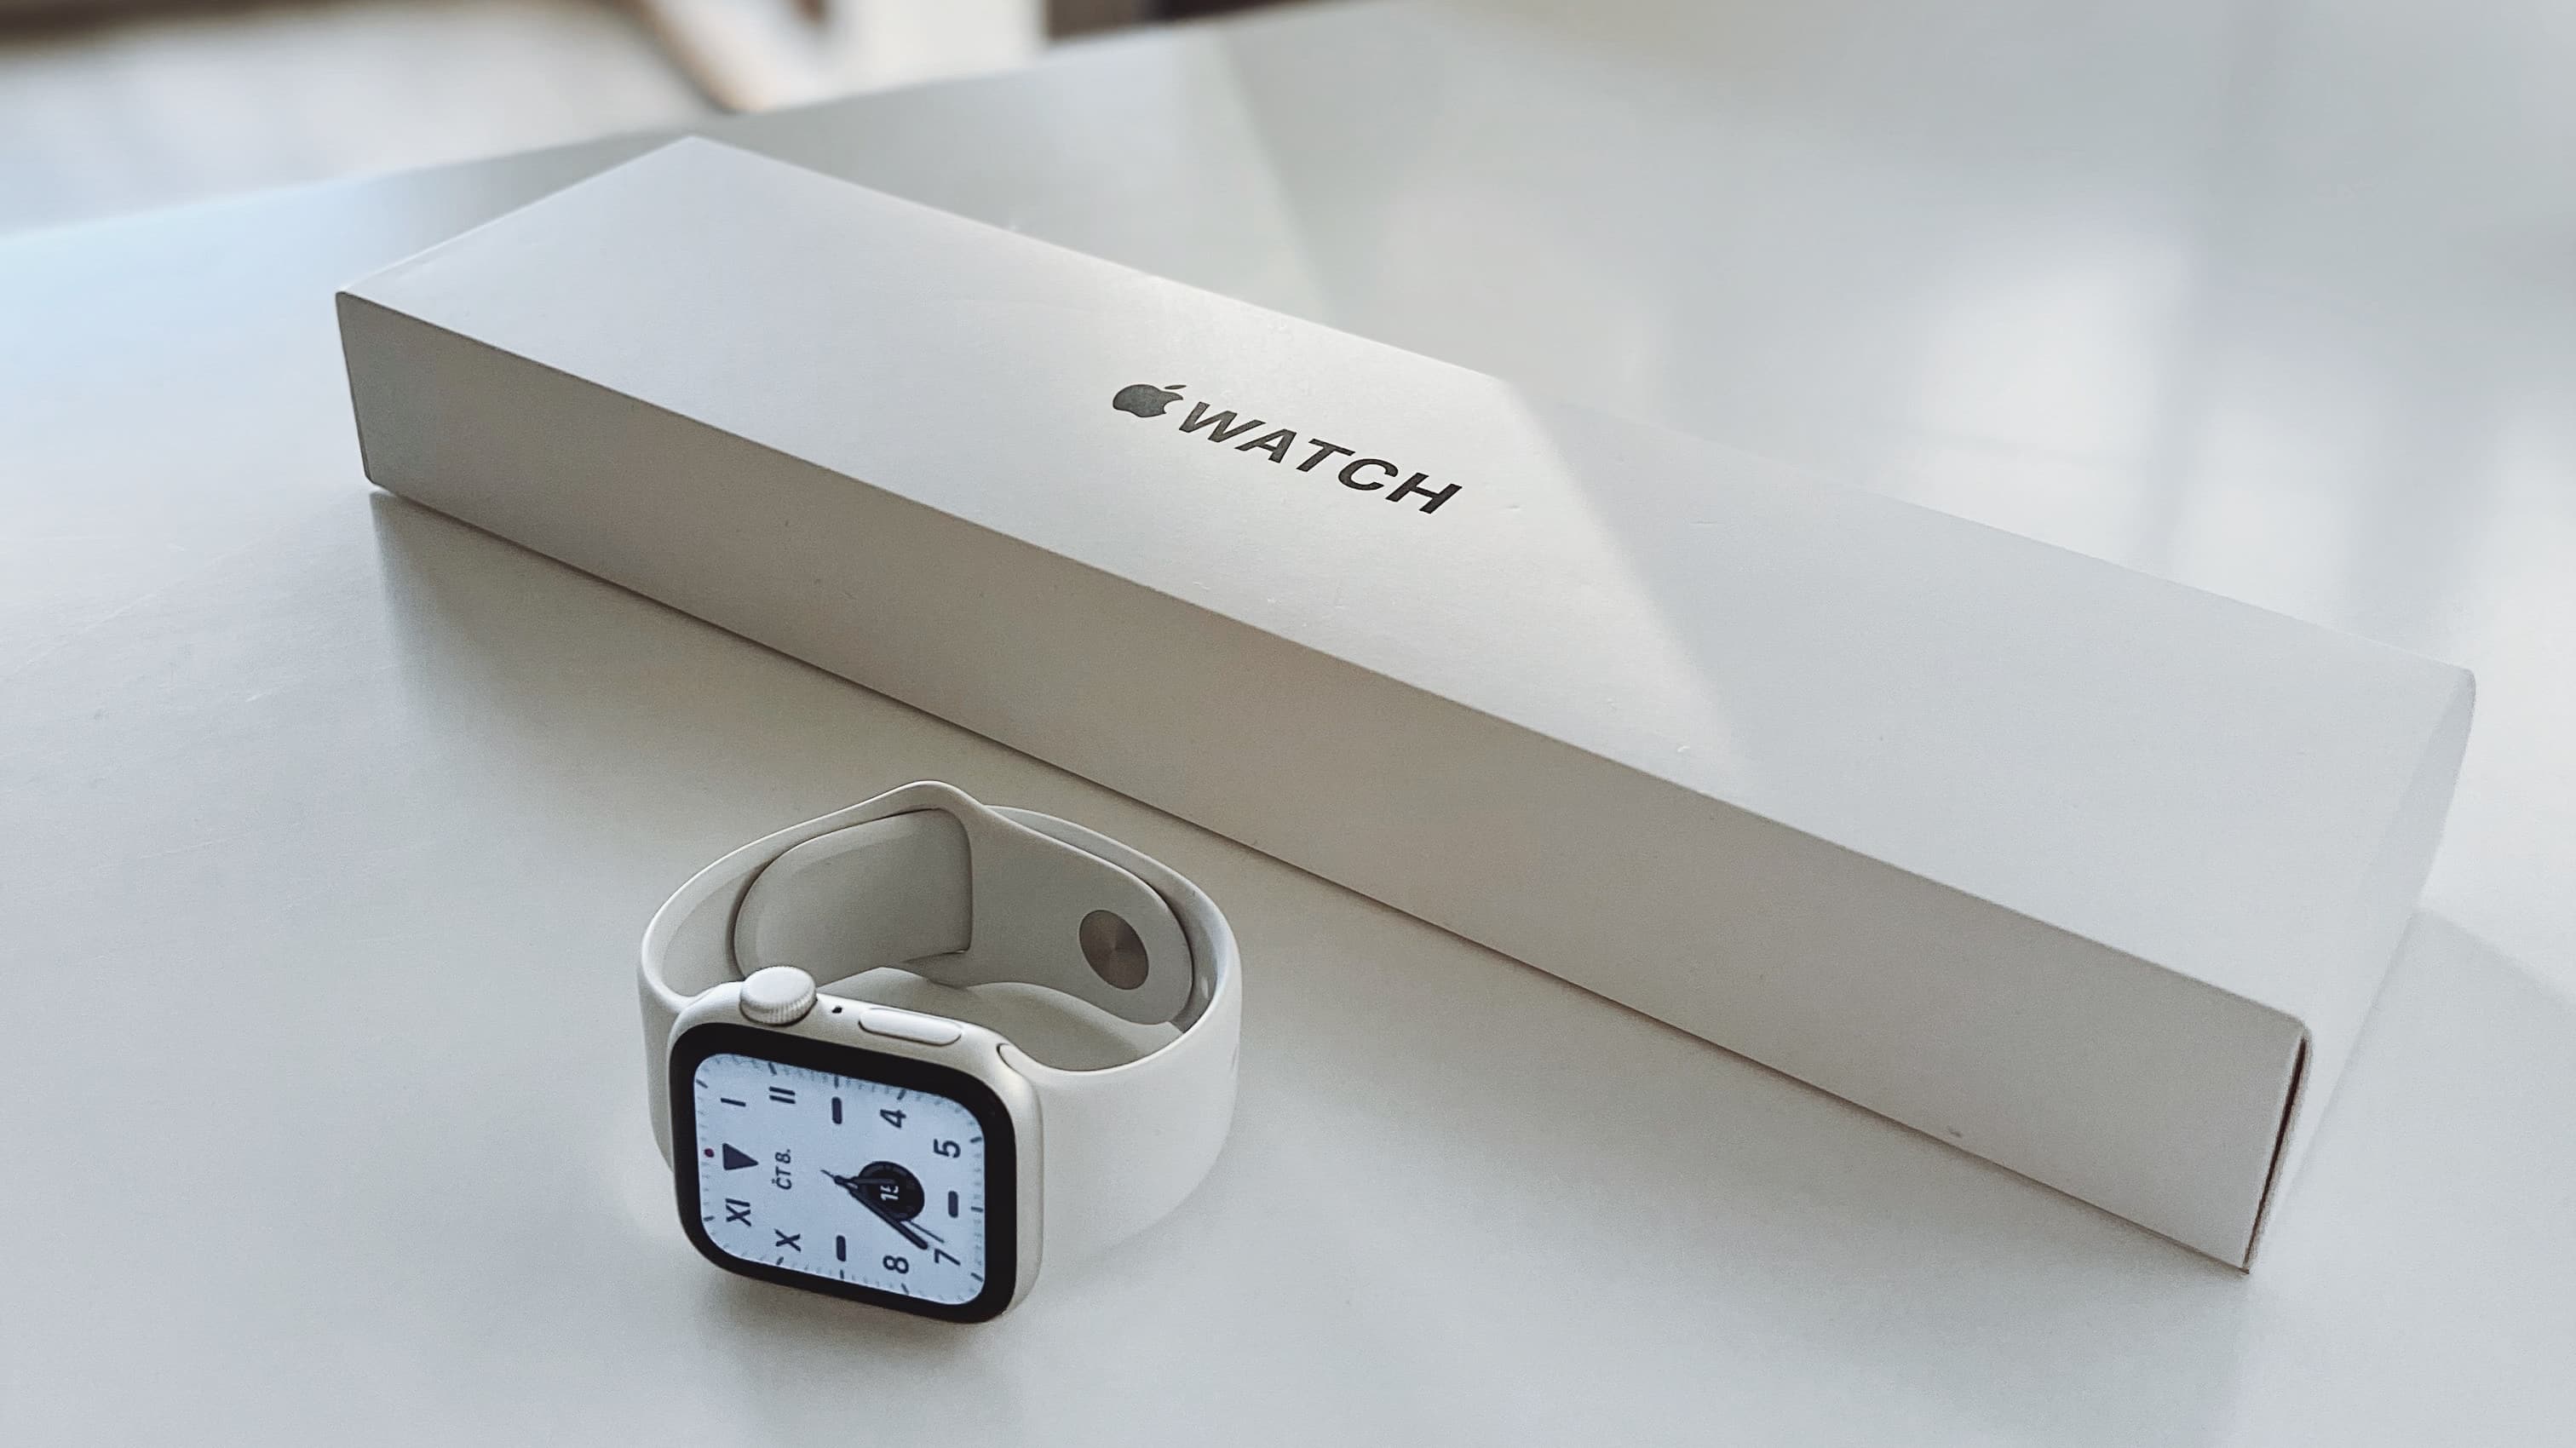 Apple Watch Series 7 rating on its side on a white table alongside its packaging